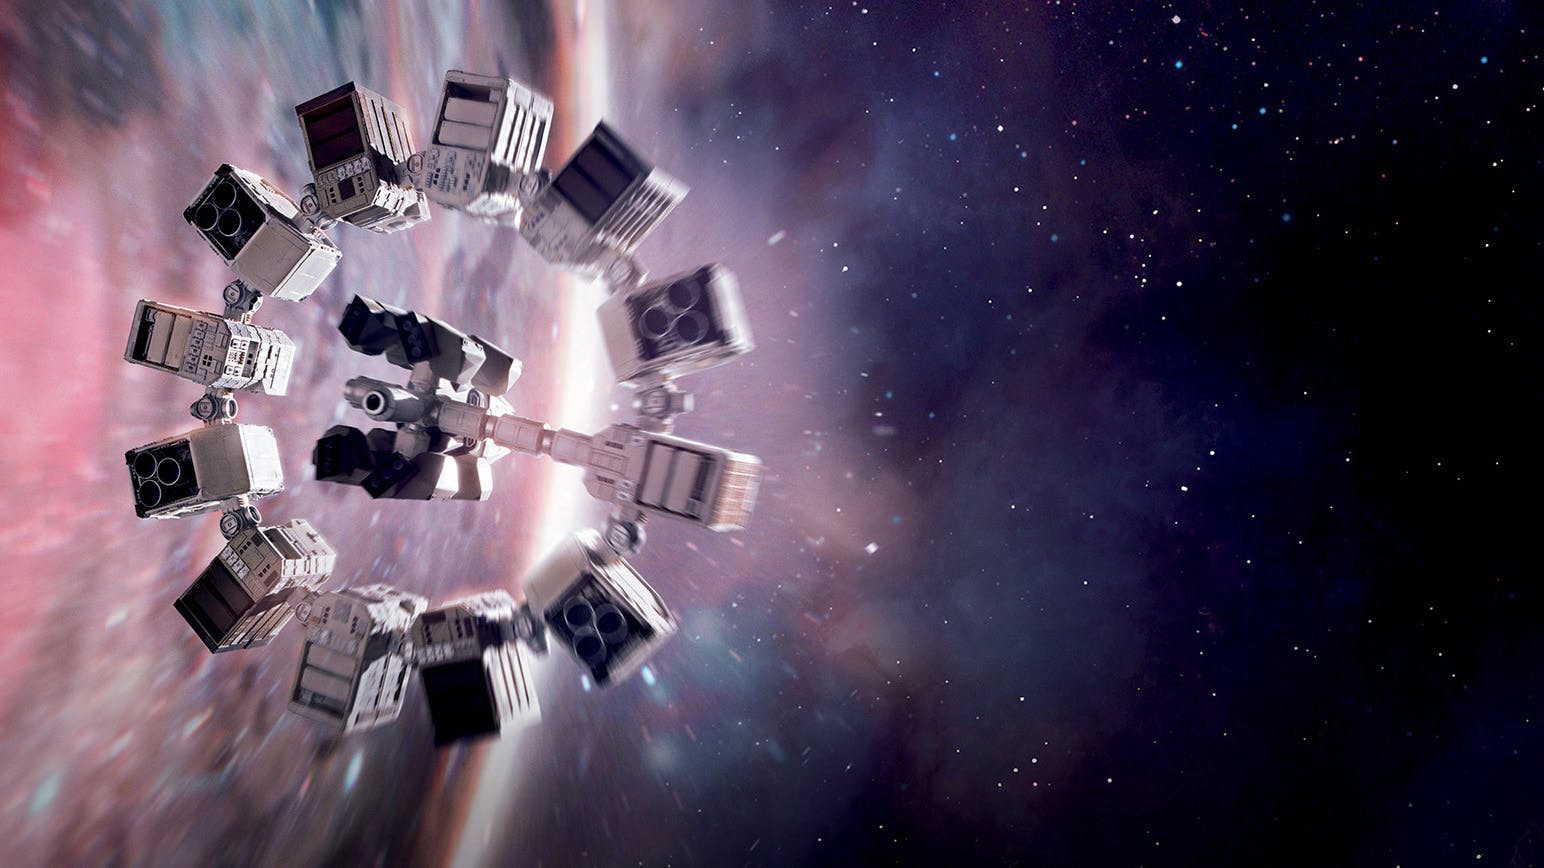 Interstellar left you baffled? Allow us to help